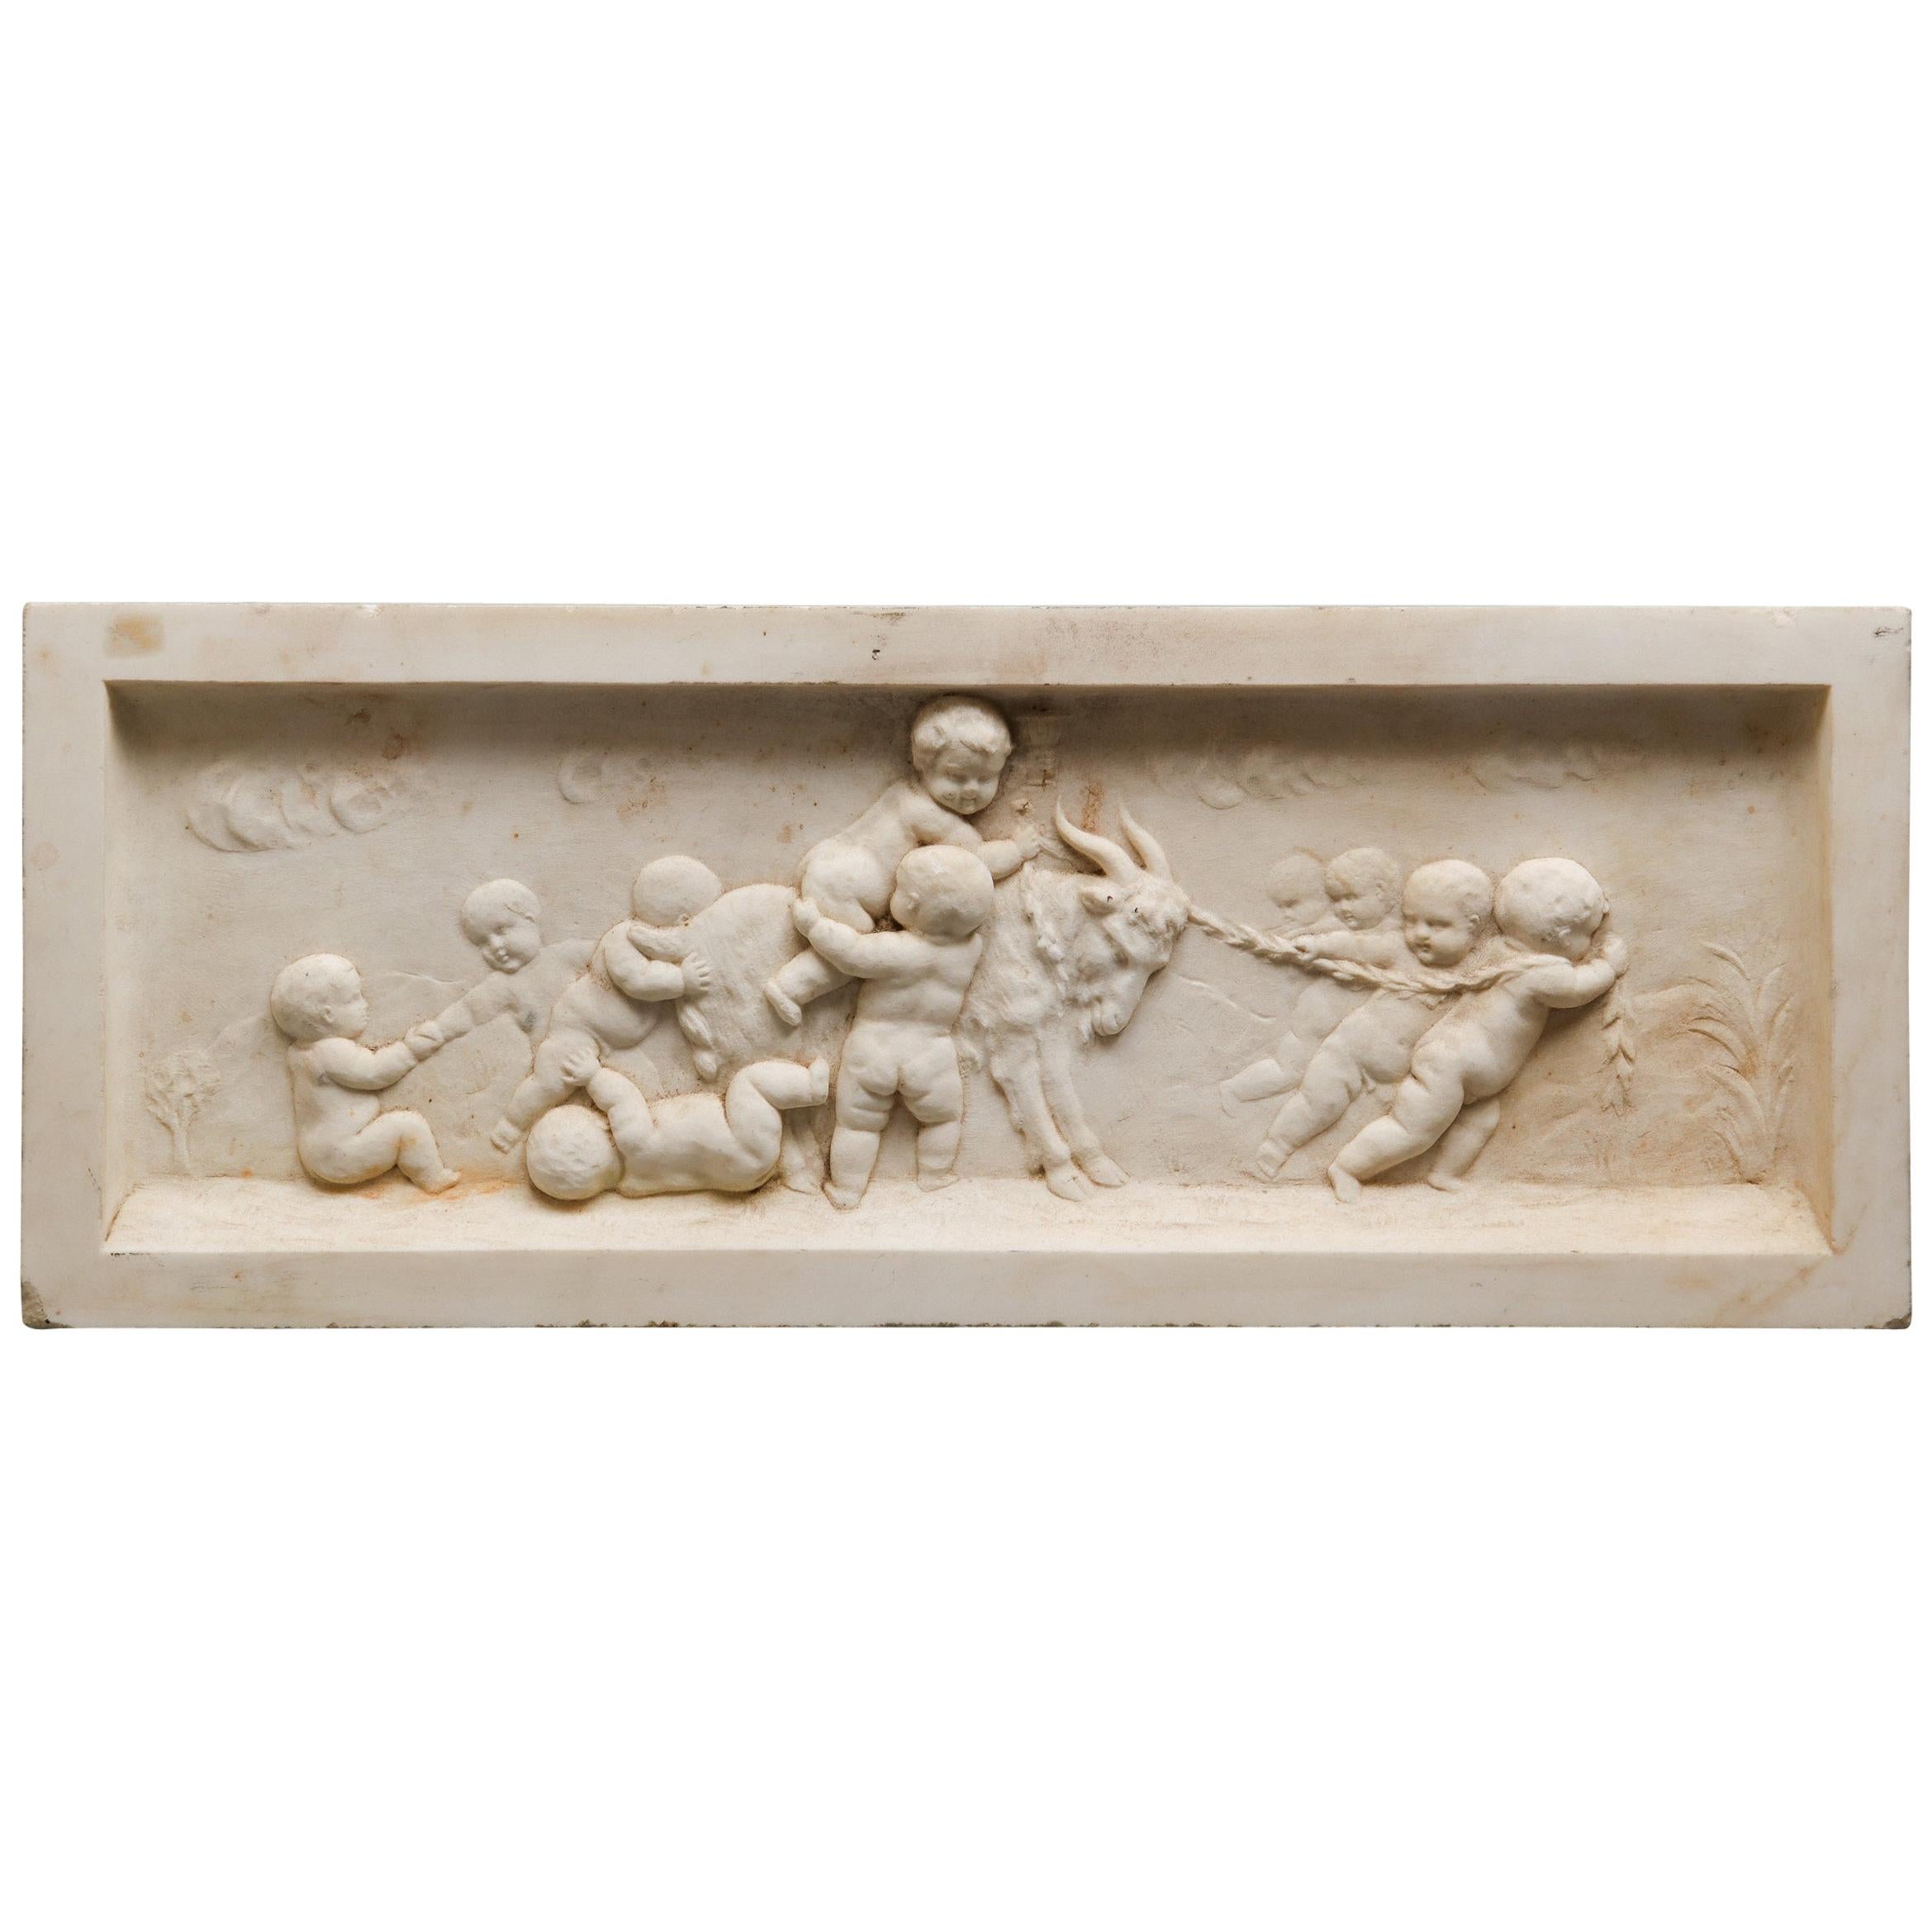 Neoclassical Carved Marble Bas-Relief Architectural Plaque with Cherubs